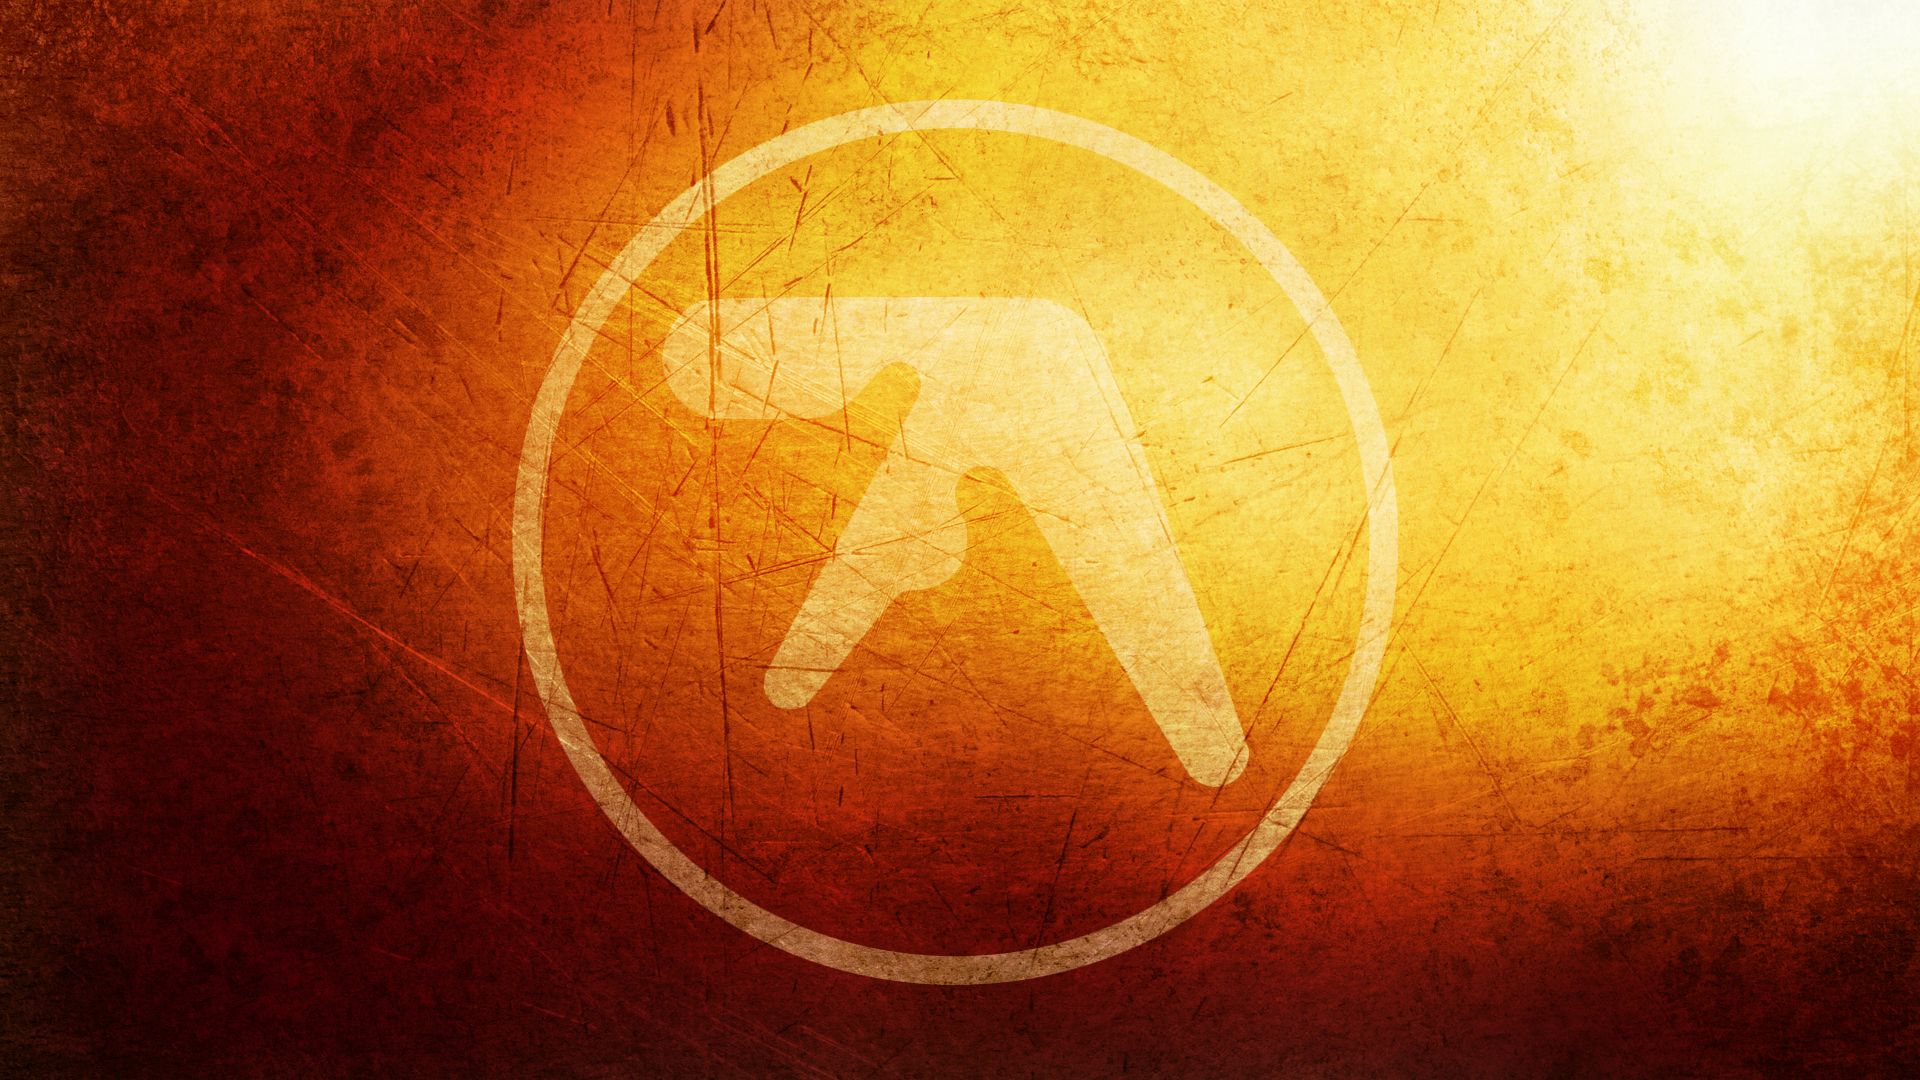 Any cool Aphex Twin wallpaper?